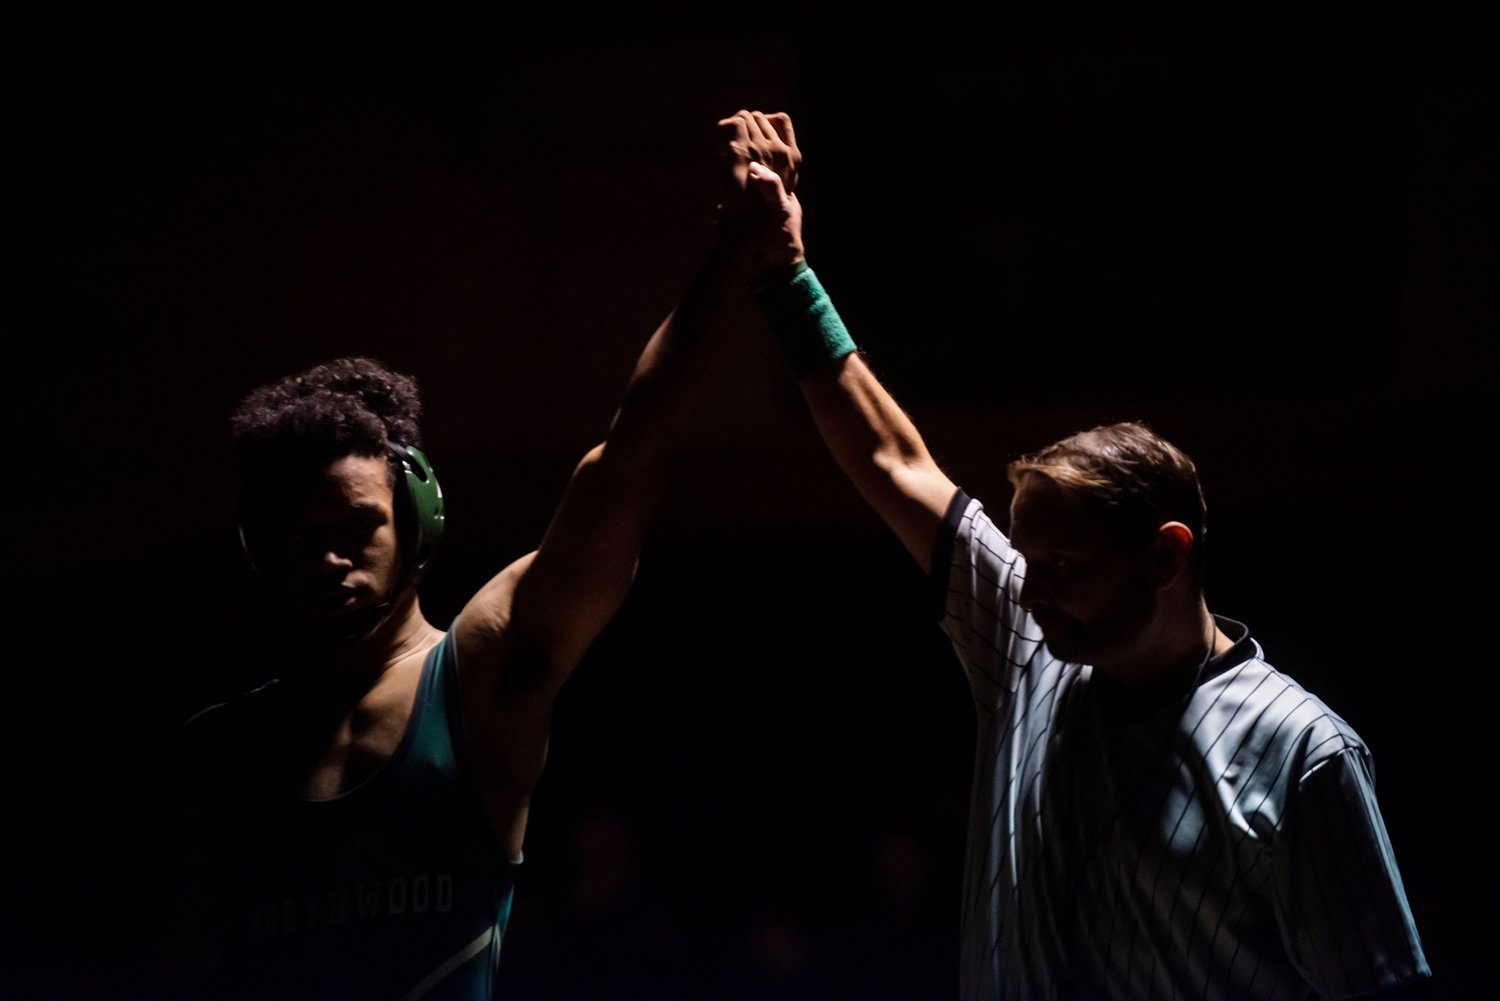 A referee raises Northwood wrestler Elijah Farrow’s arm to signal his victory after his match Friday evening.